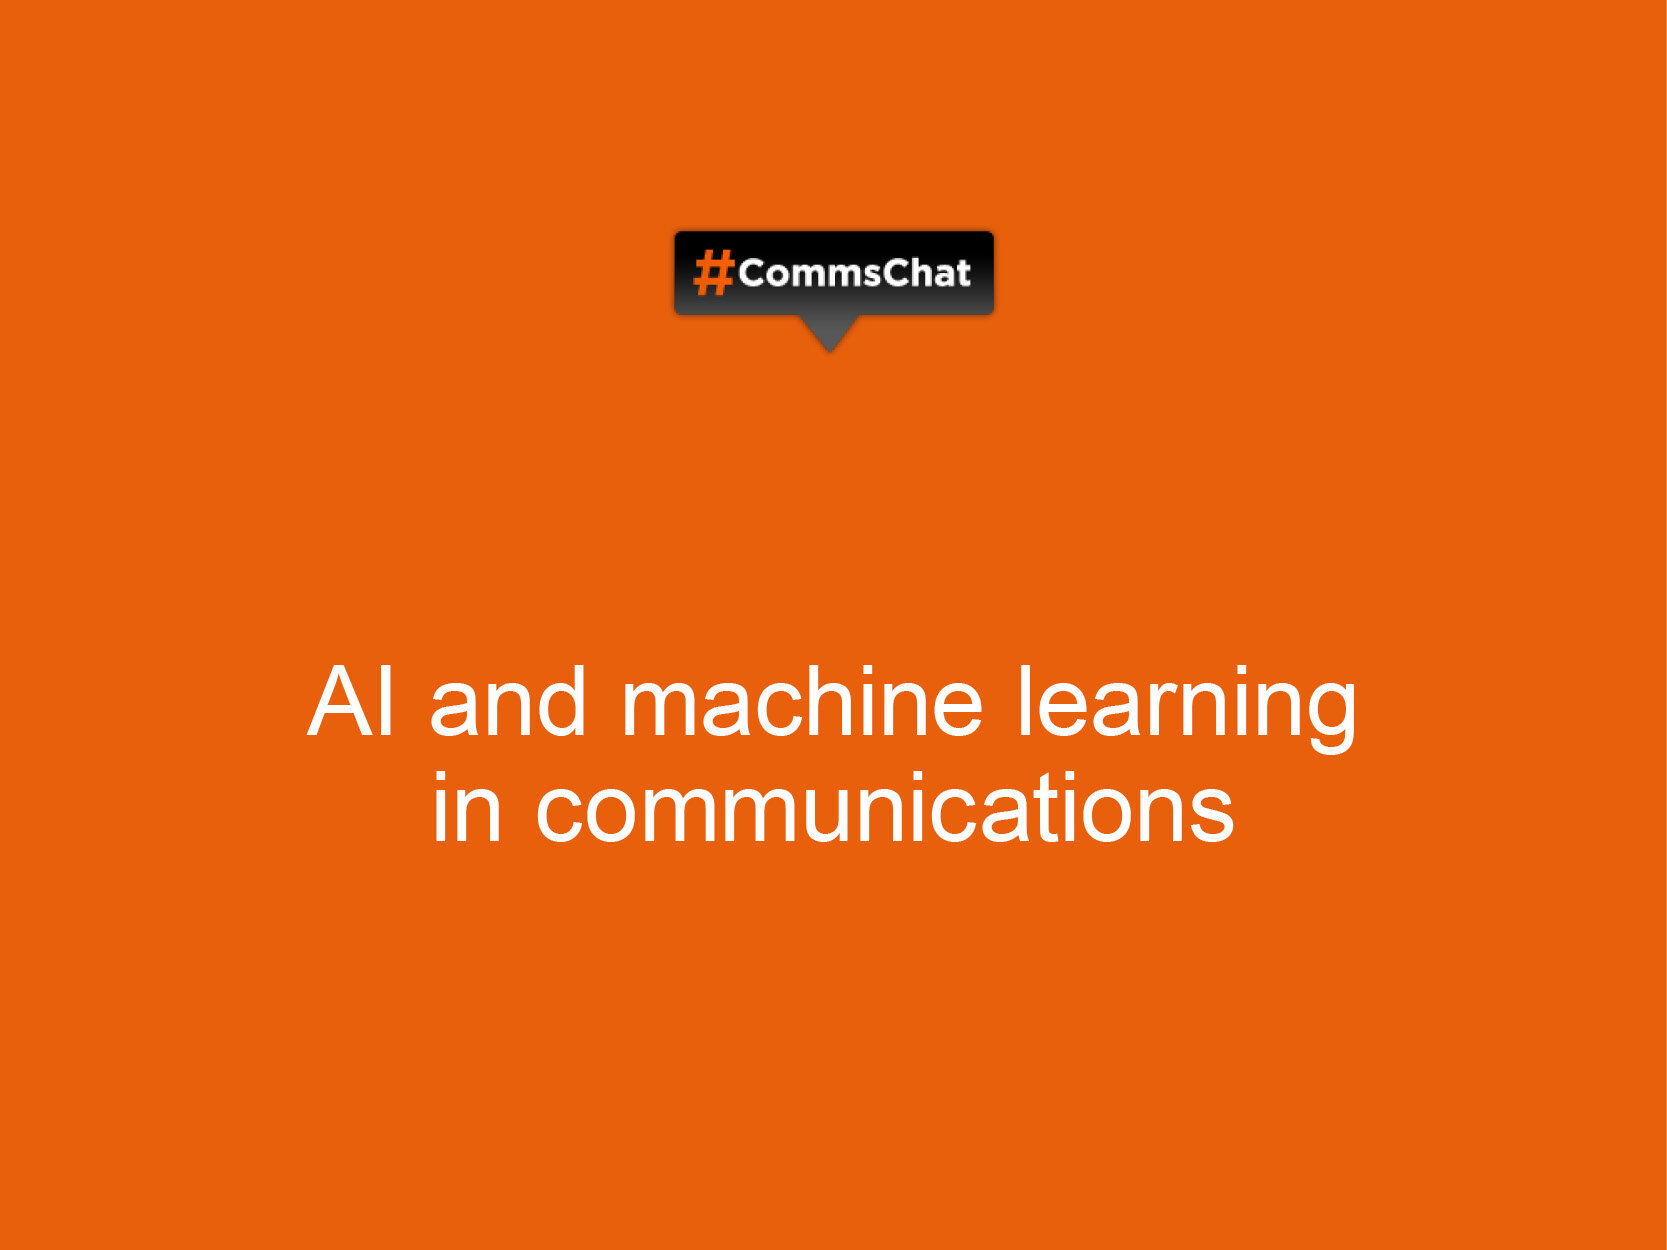 Transcript of #CommsChat on AI and machine learning in communications